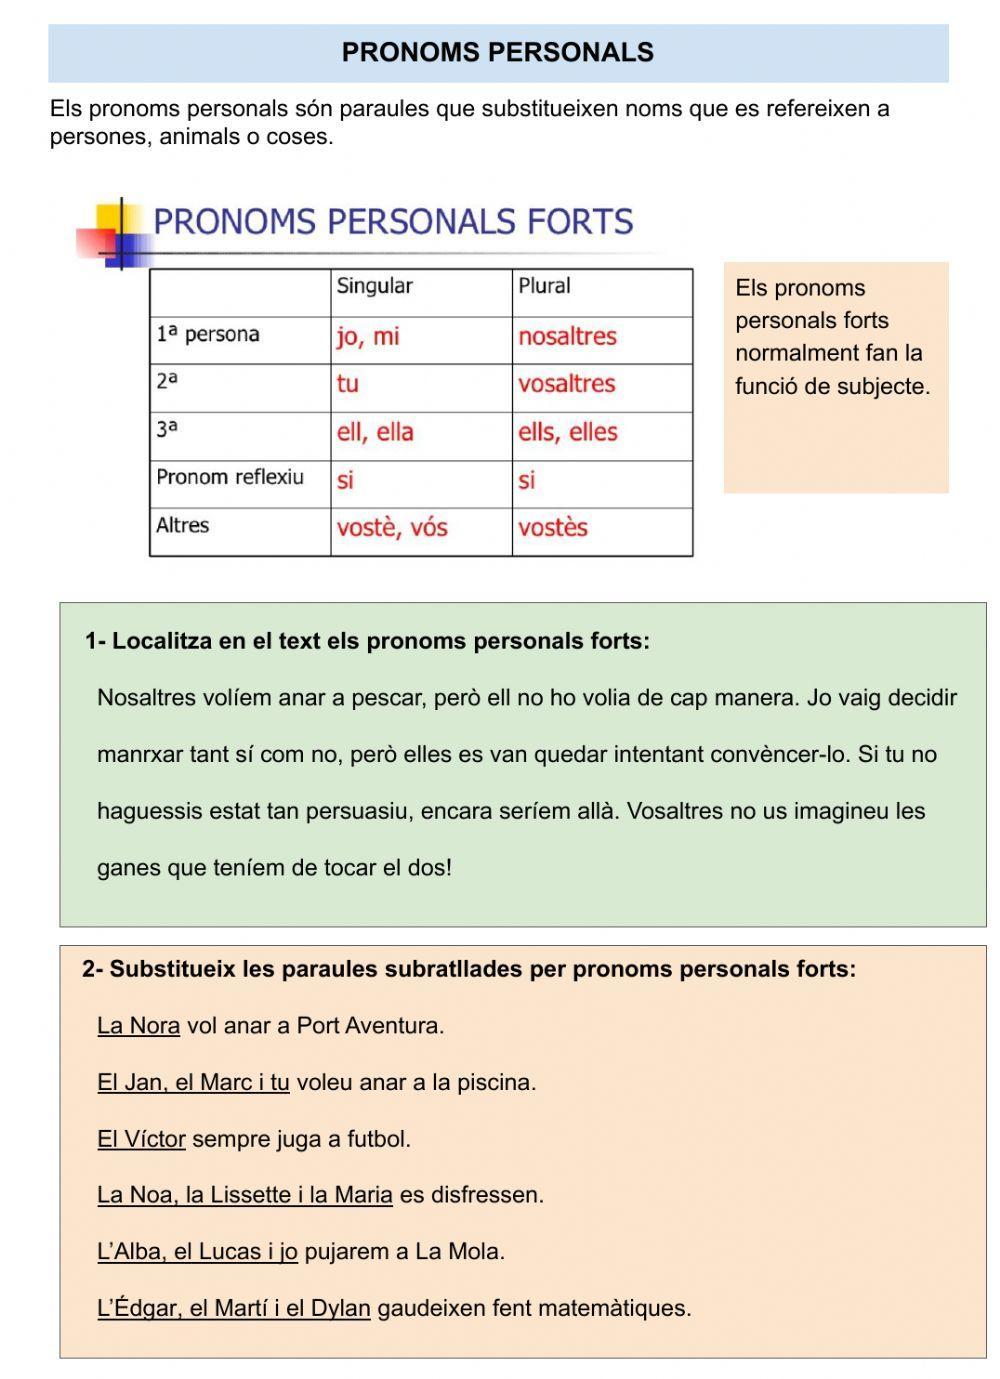 Pronoms personals forts